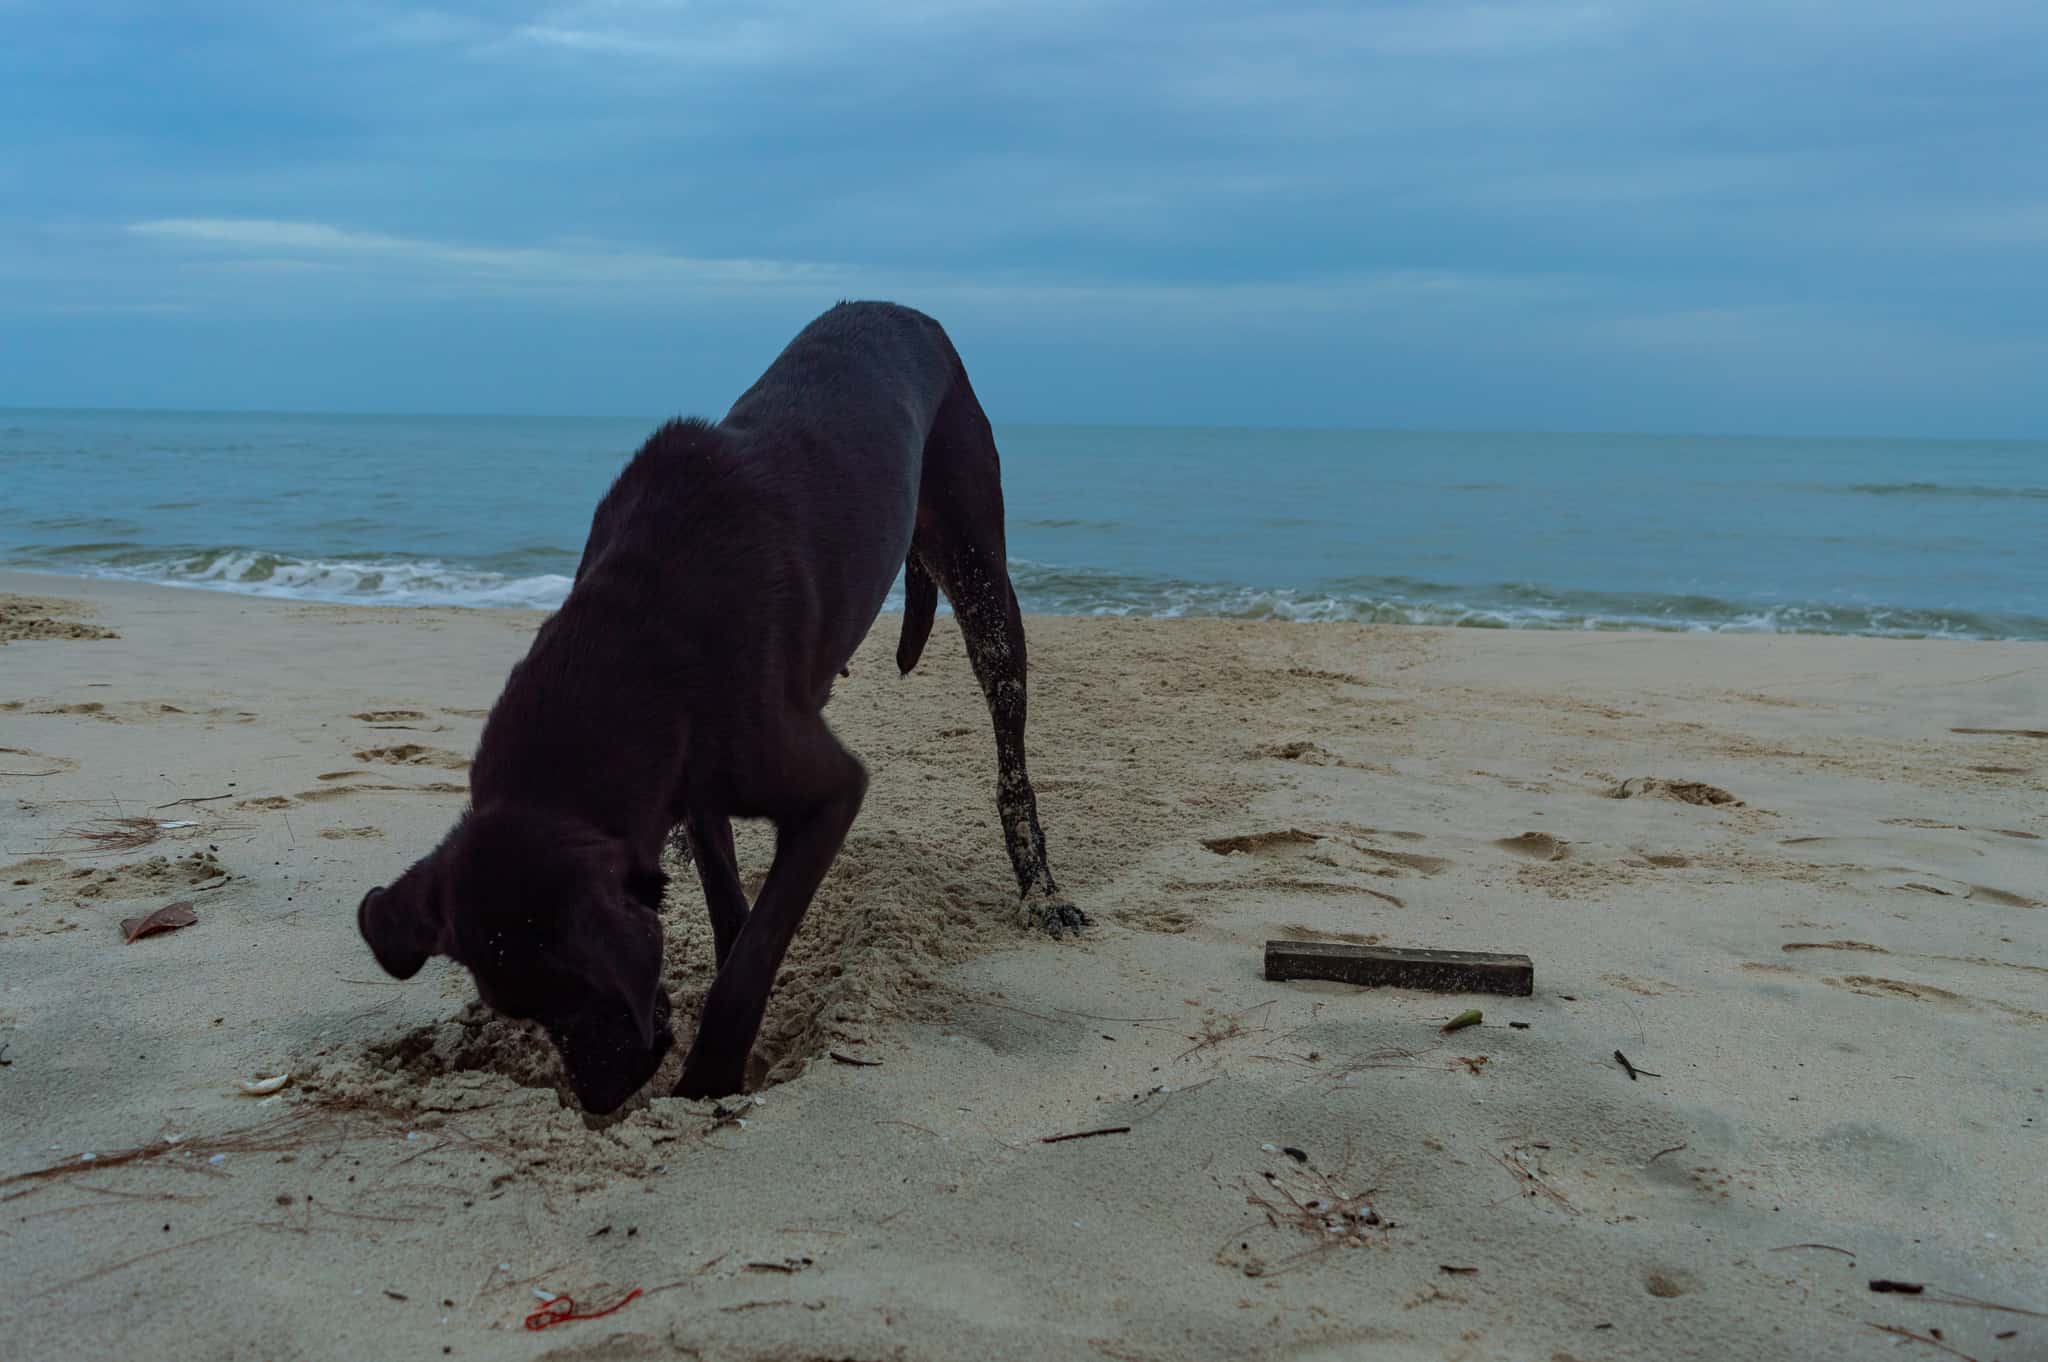 This local dogis digging for crabs under the sand, Ream National Park, Cambodia